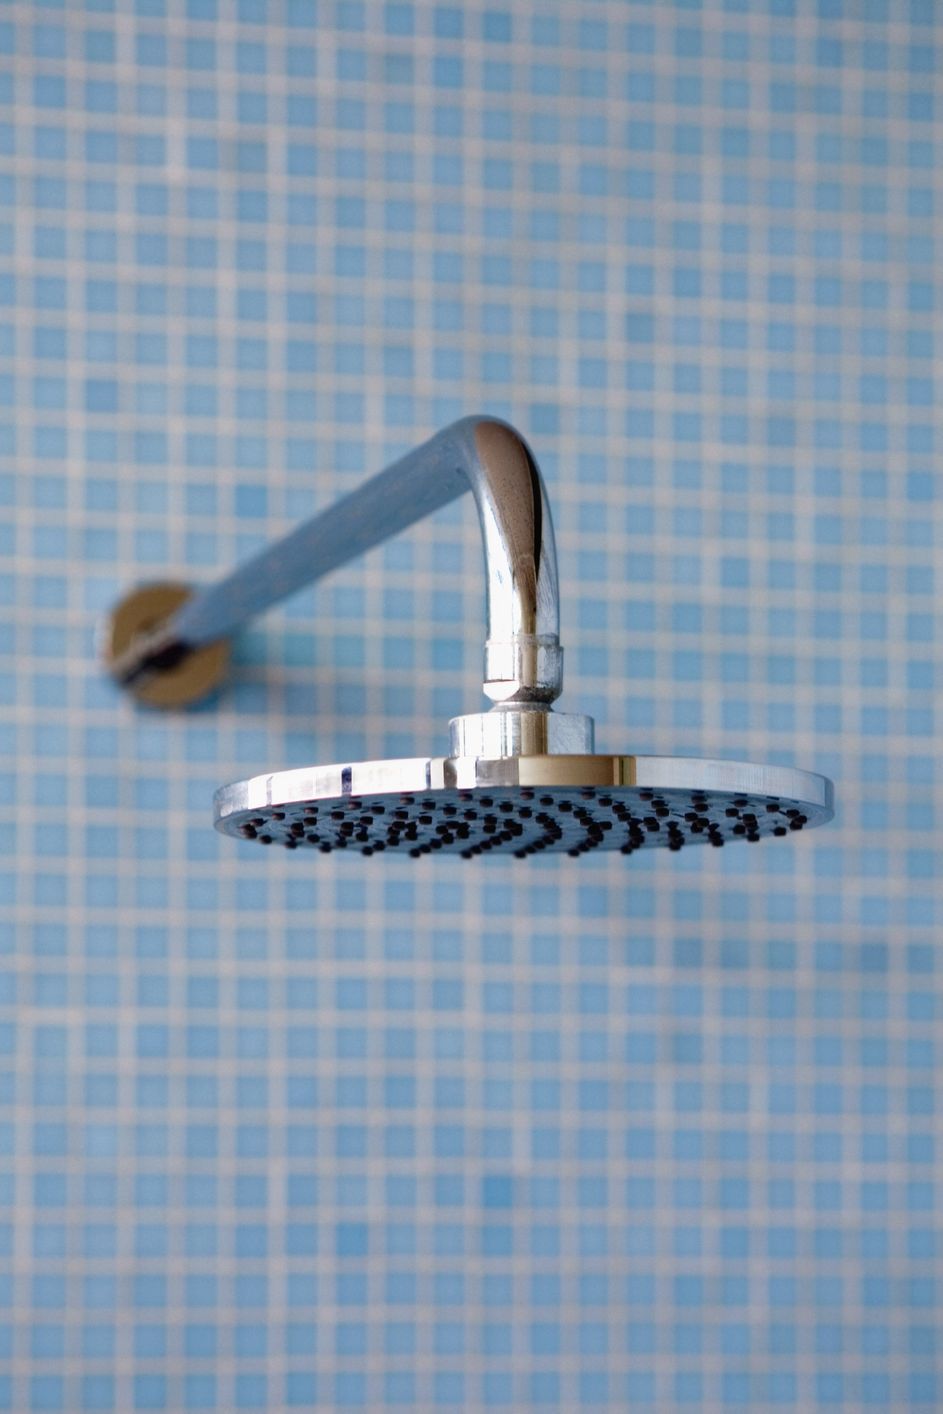 https://hips.hearstapps.com/hmg-prod/images/clean-shower-head-easy-cleaning-tips-1611077315.jpg?crop=0.4444444444444444xw:1xh;center,top&resize=980:*